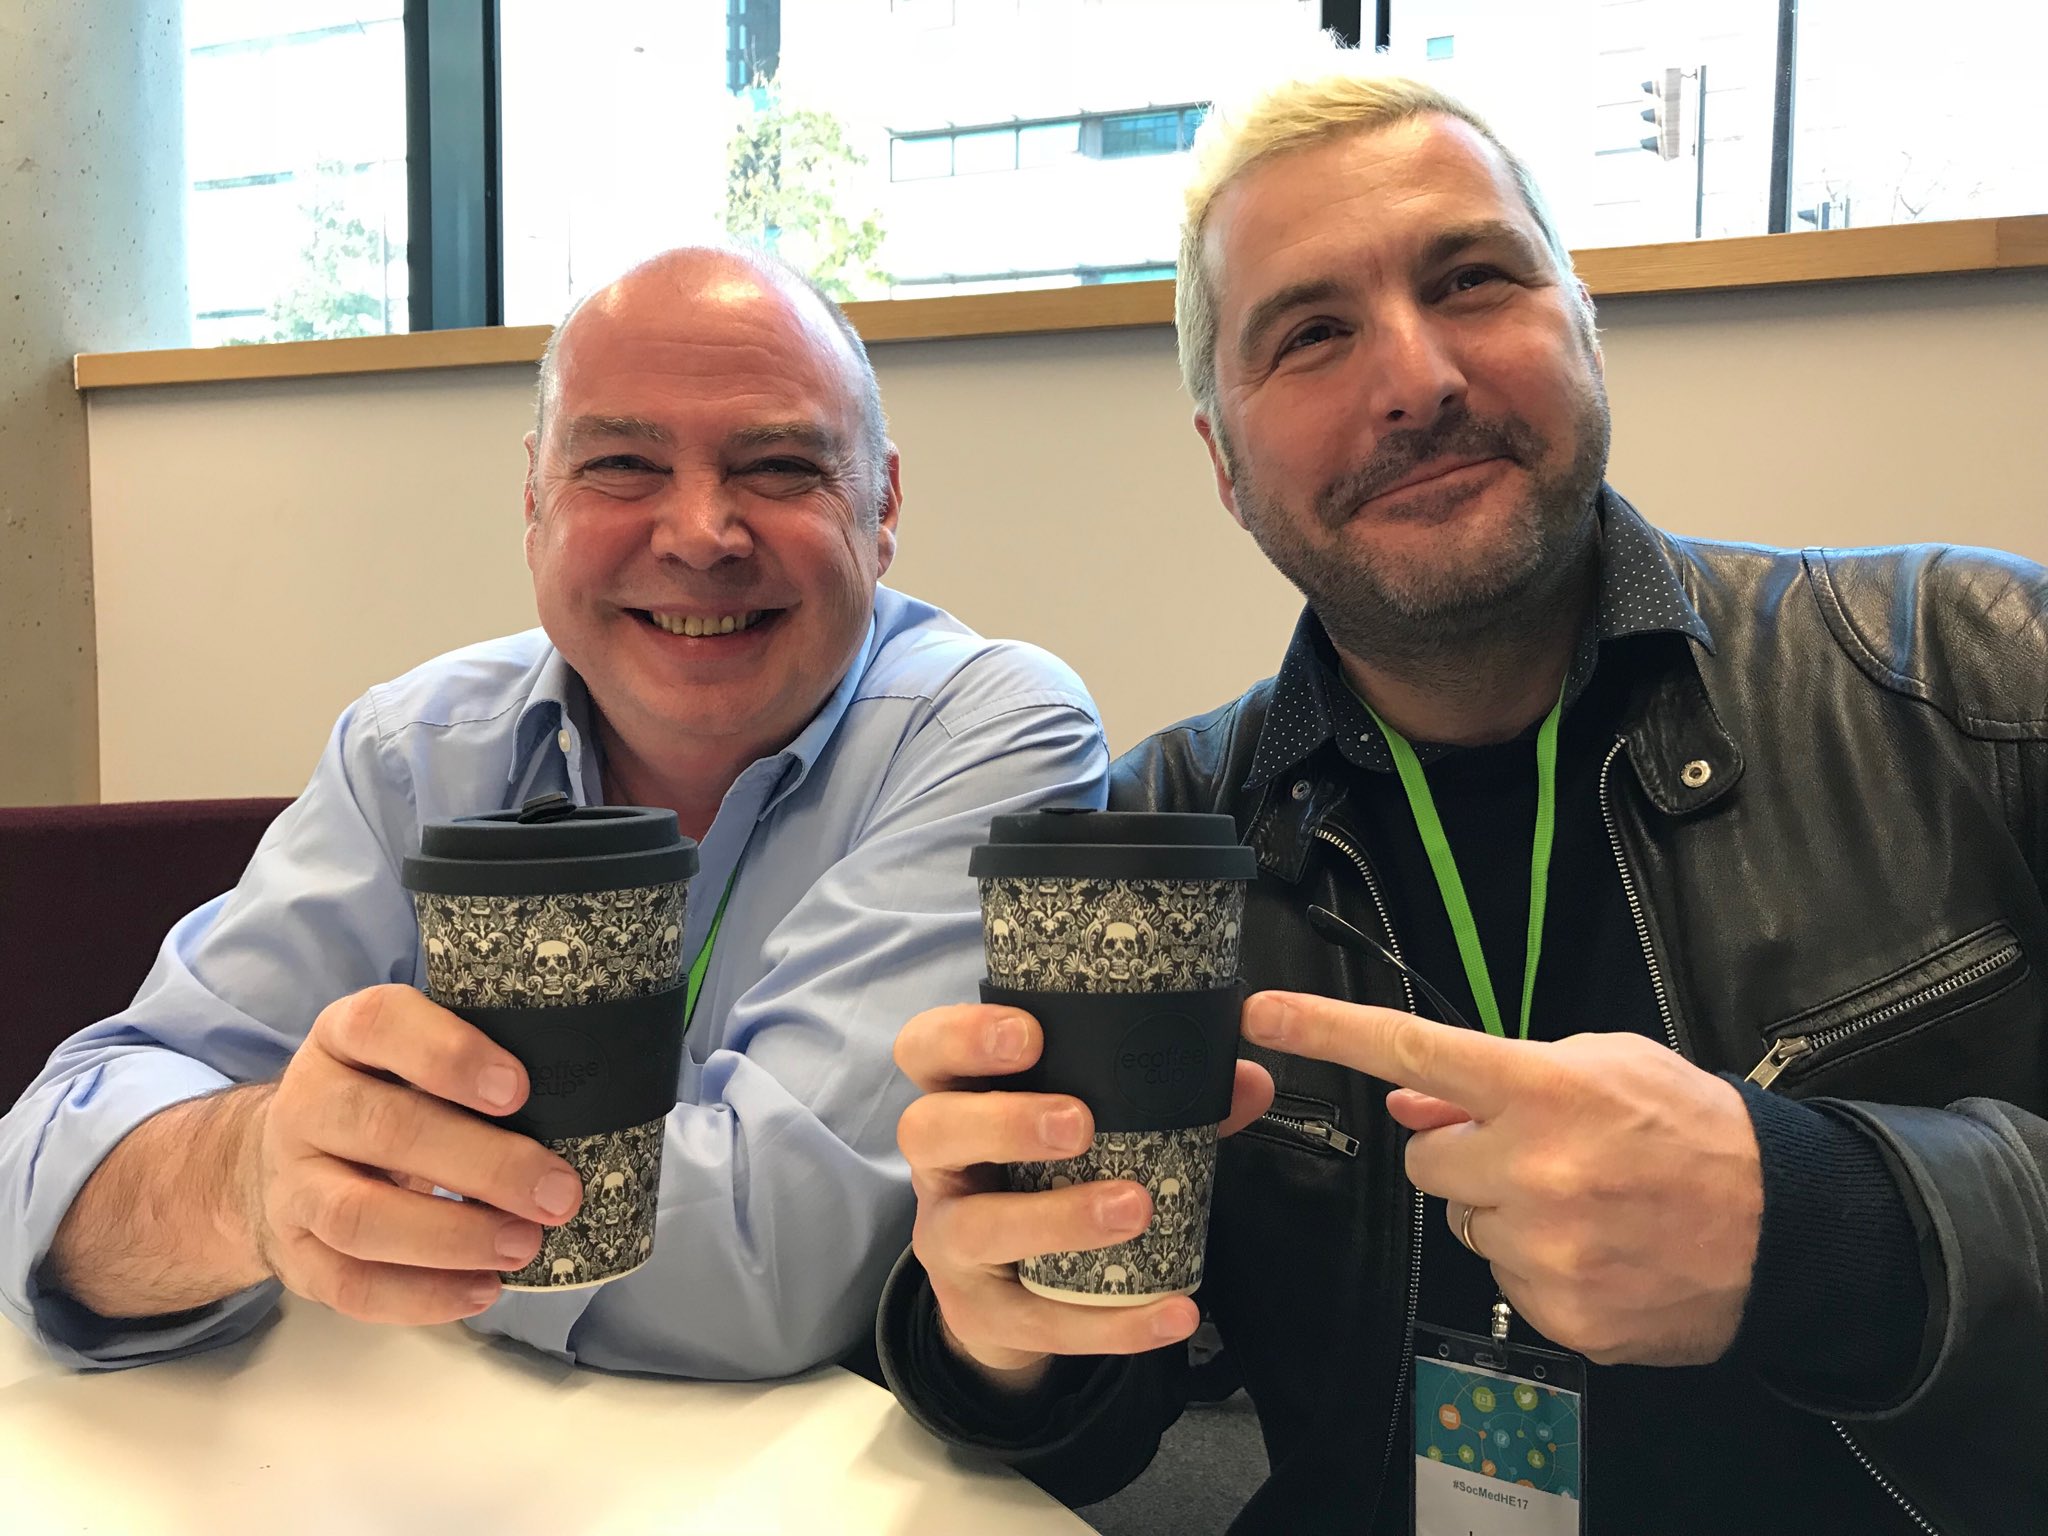 These two men are very (very!) happy with their new mugs #SocMedHE17 https://t.co/5YbdW2epKh